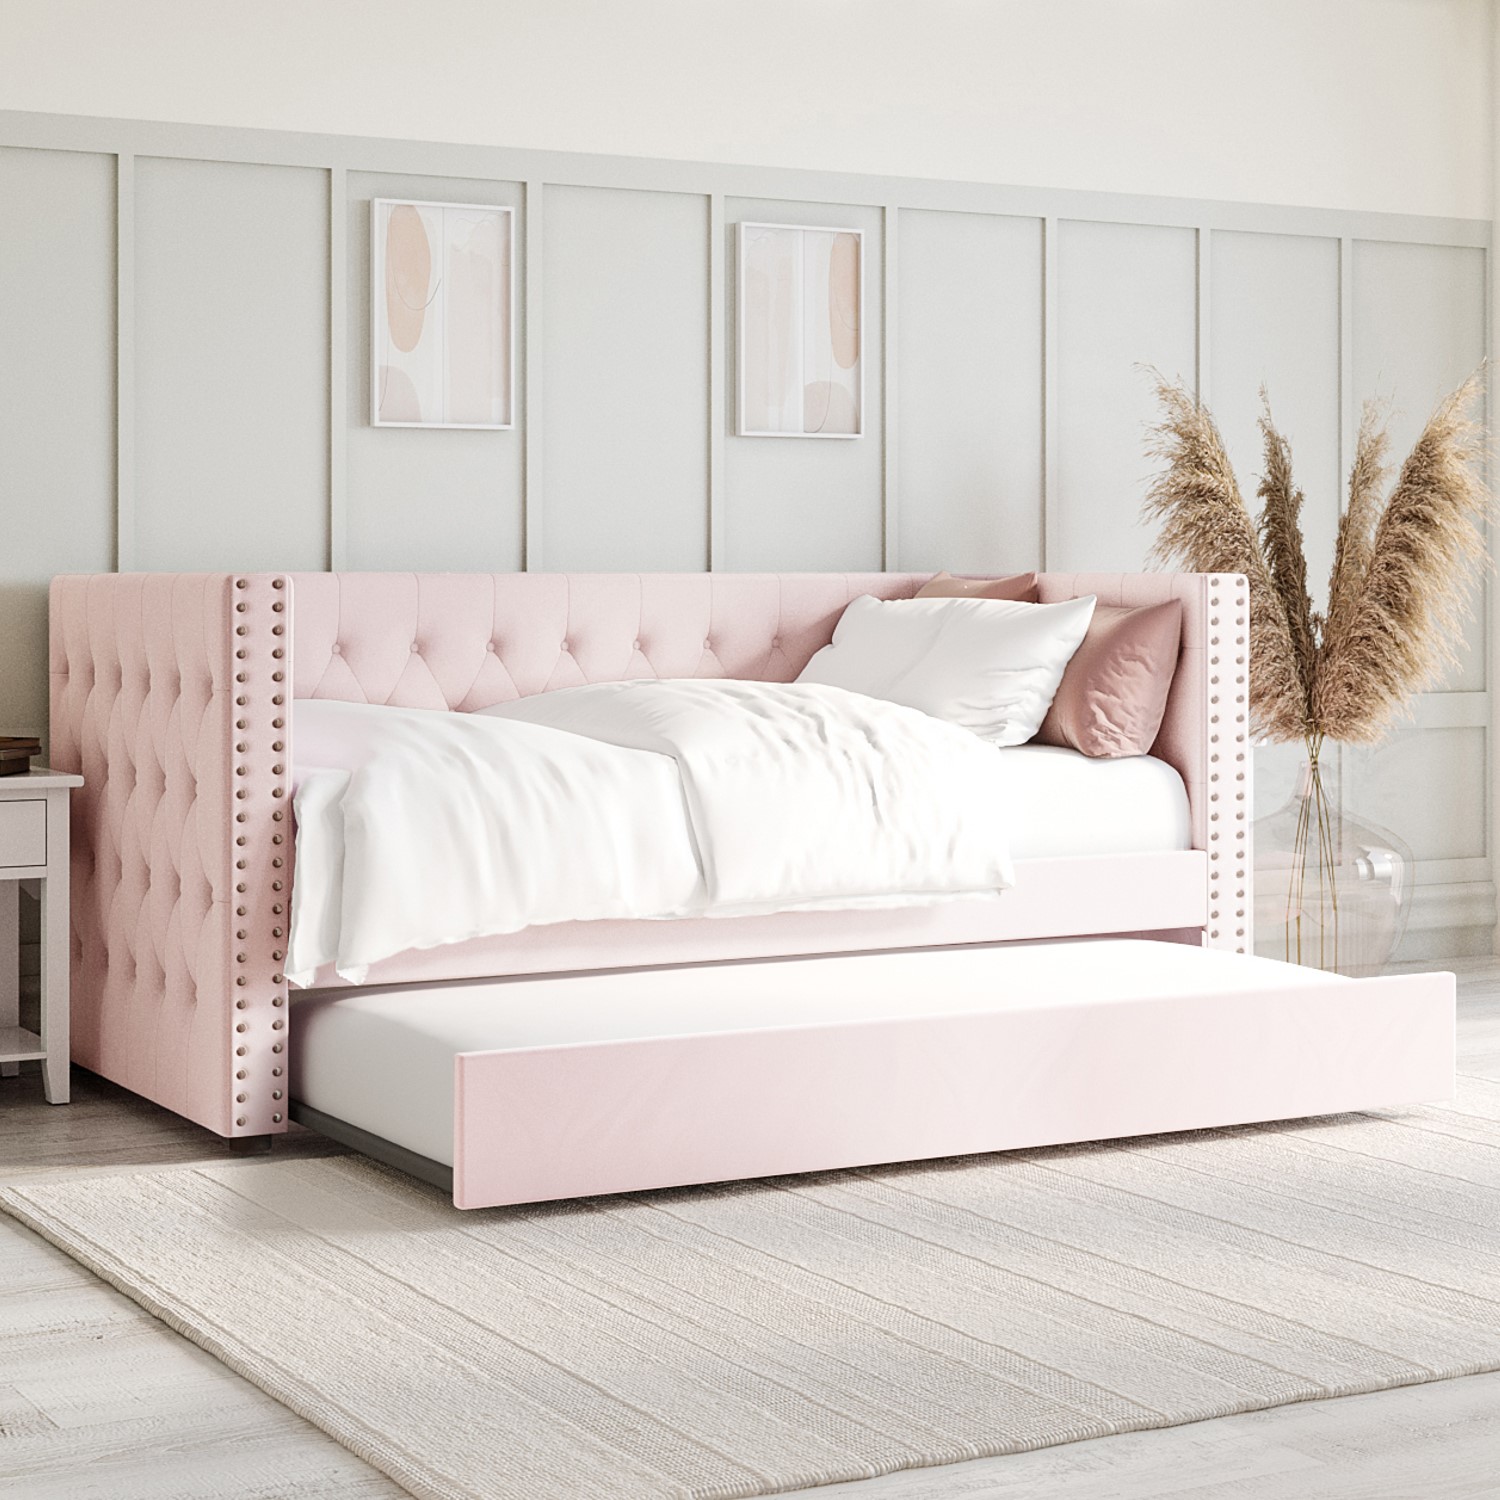 Photo of Single day bed sofa with trundle in pink velvet - sacha